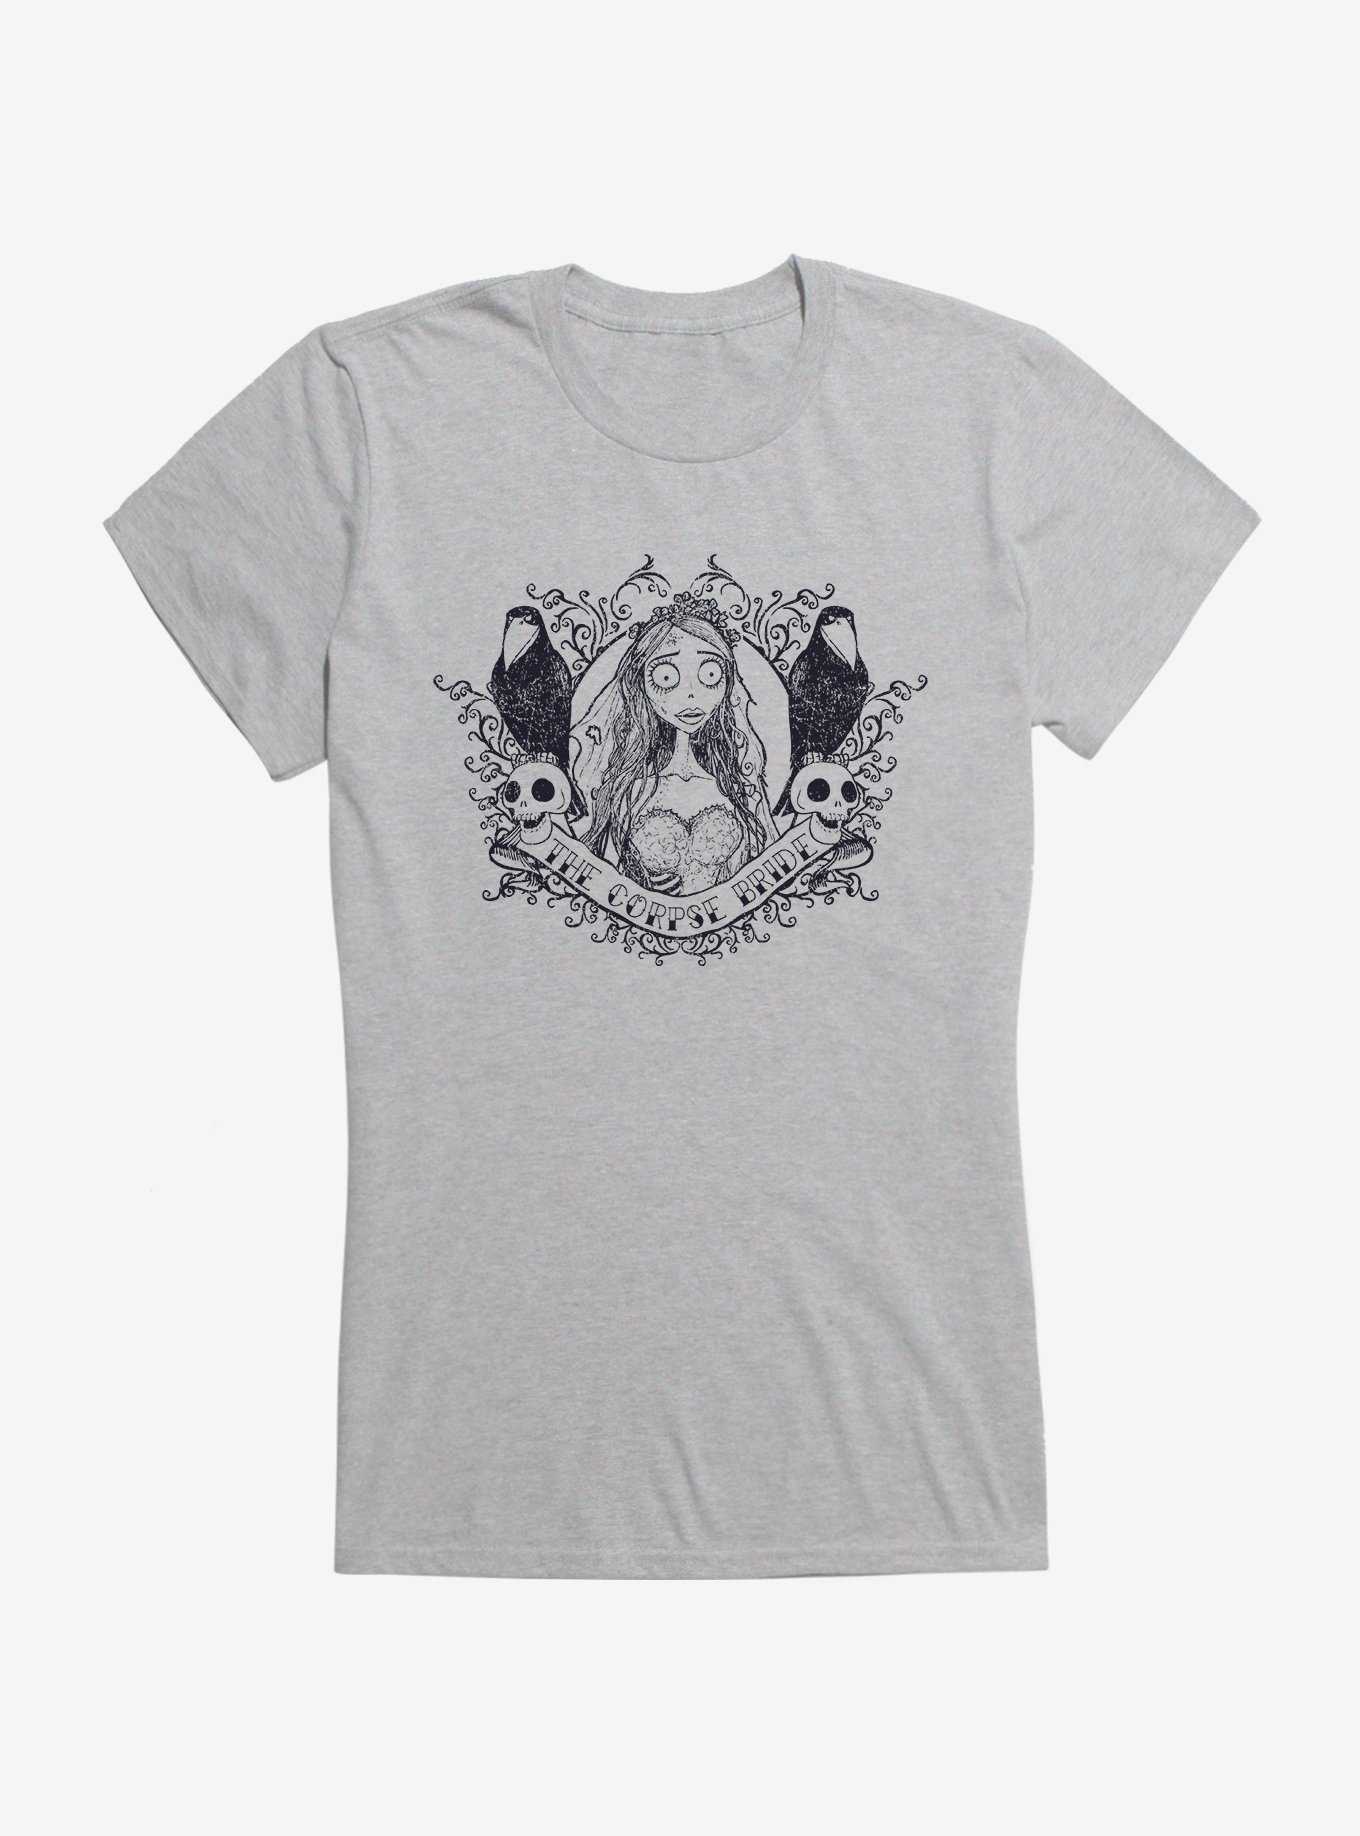 Corpse Bride Emily The Corpse Bride Girls T-Shirt, HEATHER, hi-res